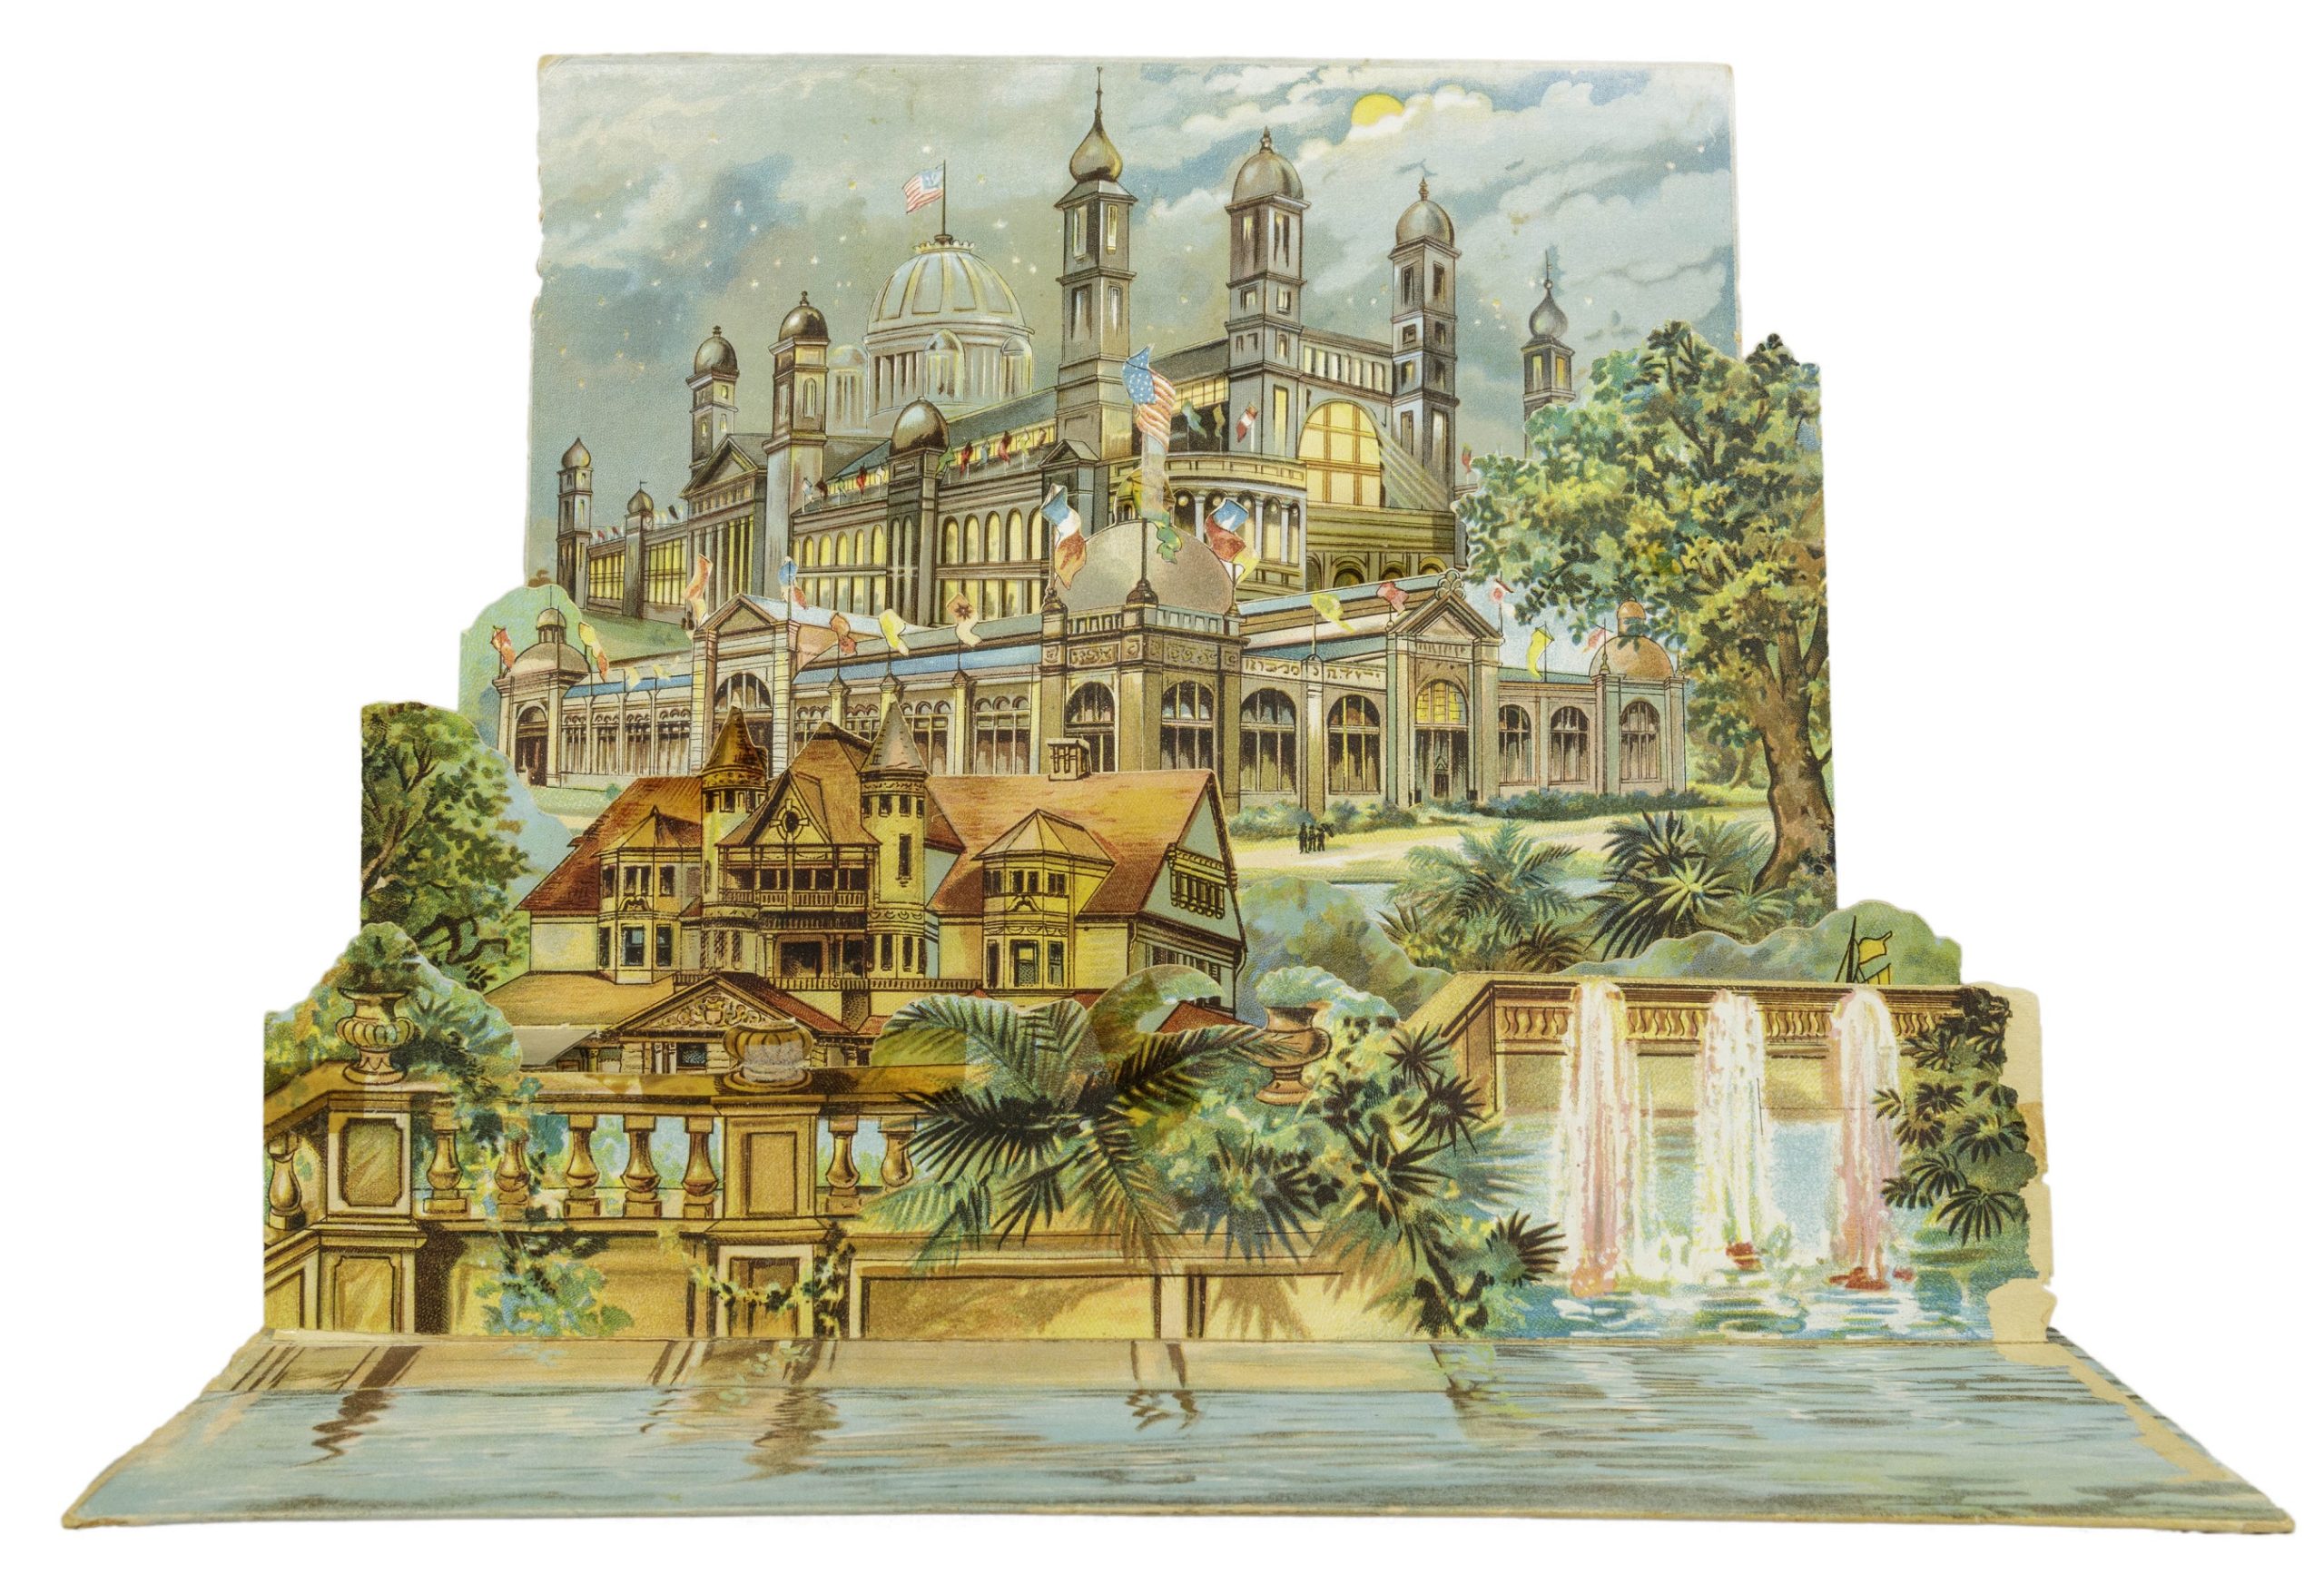 Sheets of paper layered one behind the other to create a 3D scene of buildings as if they rise up a hill. At the bottom is a body of water with fountains and a decorative balustrade running along its edge. Above this is a large neo-Romanesque house. Above this is an even larger rectangular building with grand entrances on each side, domes on the corners, and many flags. Above this is a cathedral-like building with tall windows filled with light and many domed towers. A US flag flies from its central, largest dome. The buildings are surrounded by lush plants.